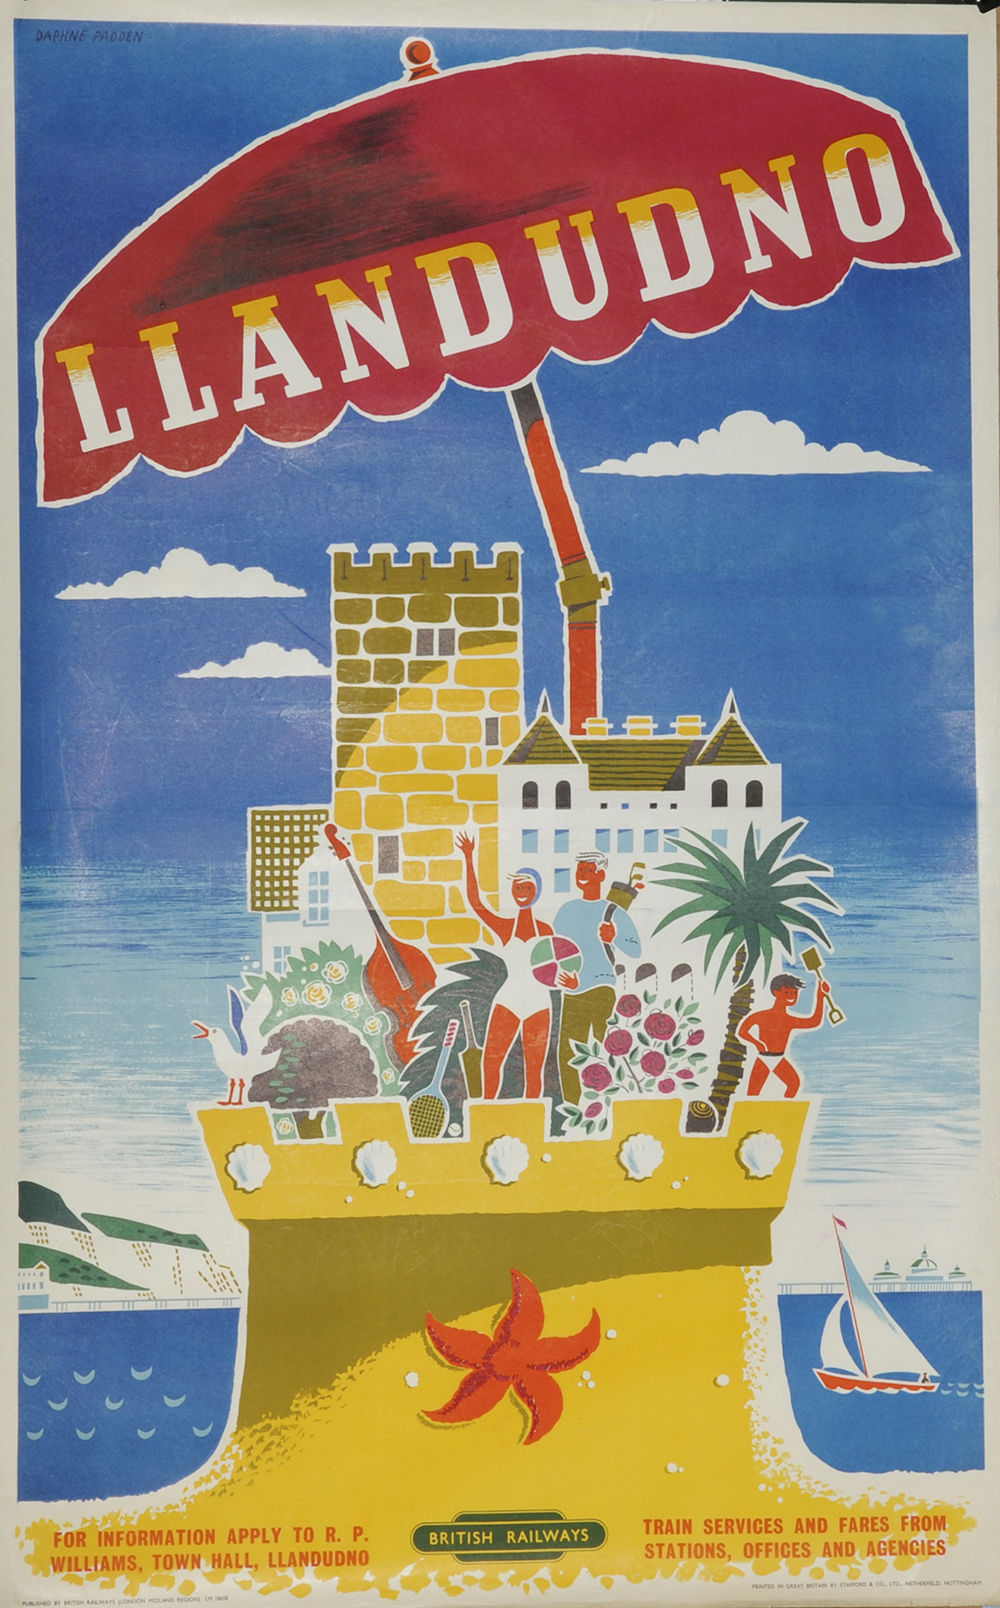 Poster, British Railways 'Llandudno' by Padden, D/R size. Depicts a family standing on raised castle shape with a large beach type umbrella above. Published by British Railways London Midland Region and printed by Stafford & Co